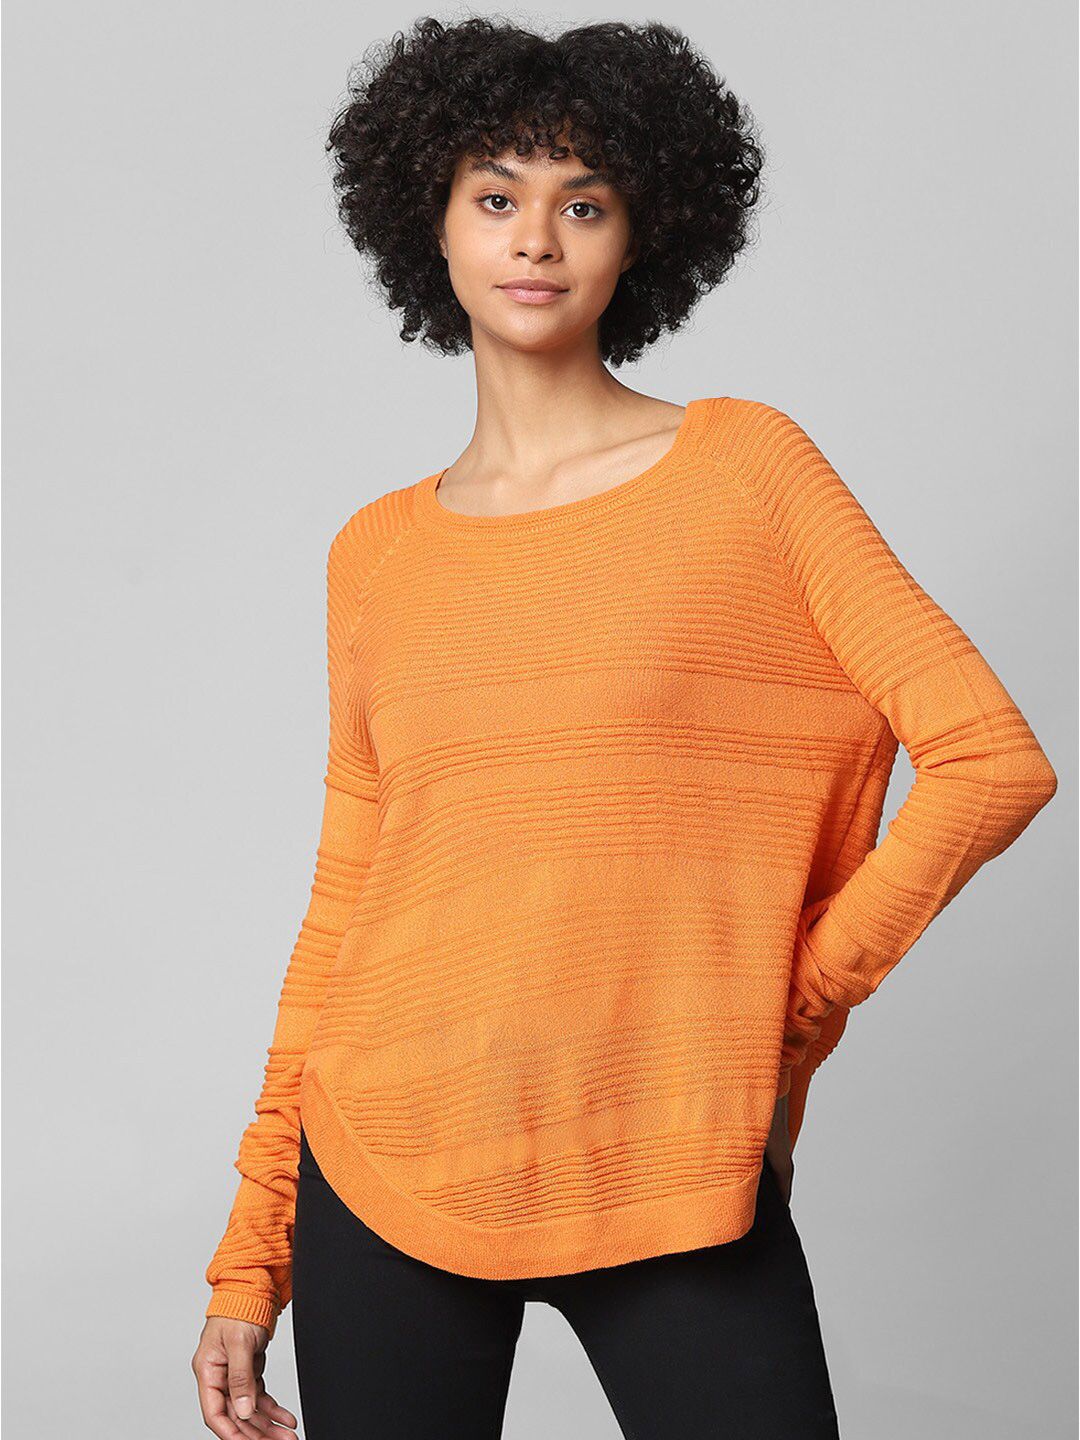 ONLY Women Orange Pullover Price in India